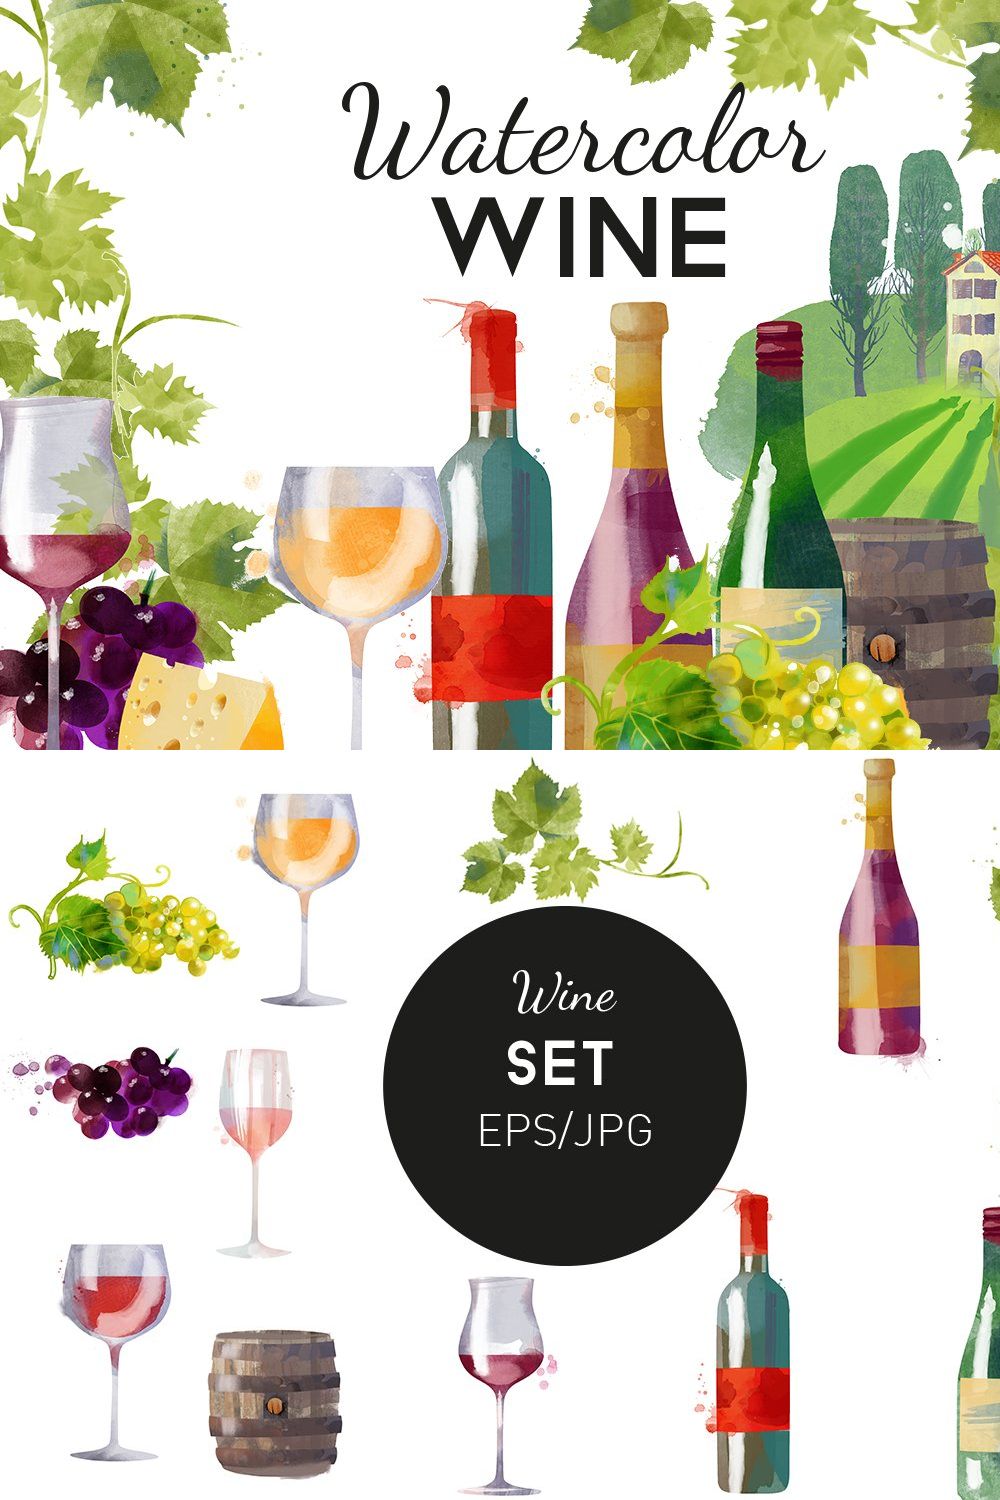 Watercolor wine pinterest preview image.